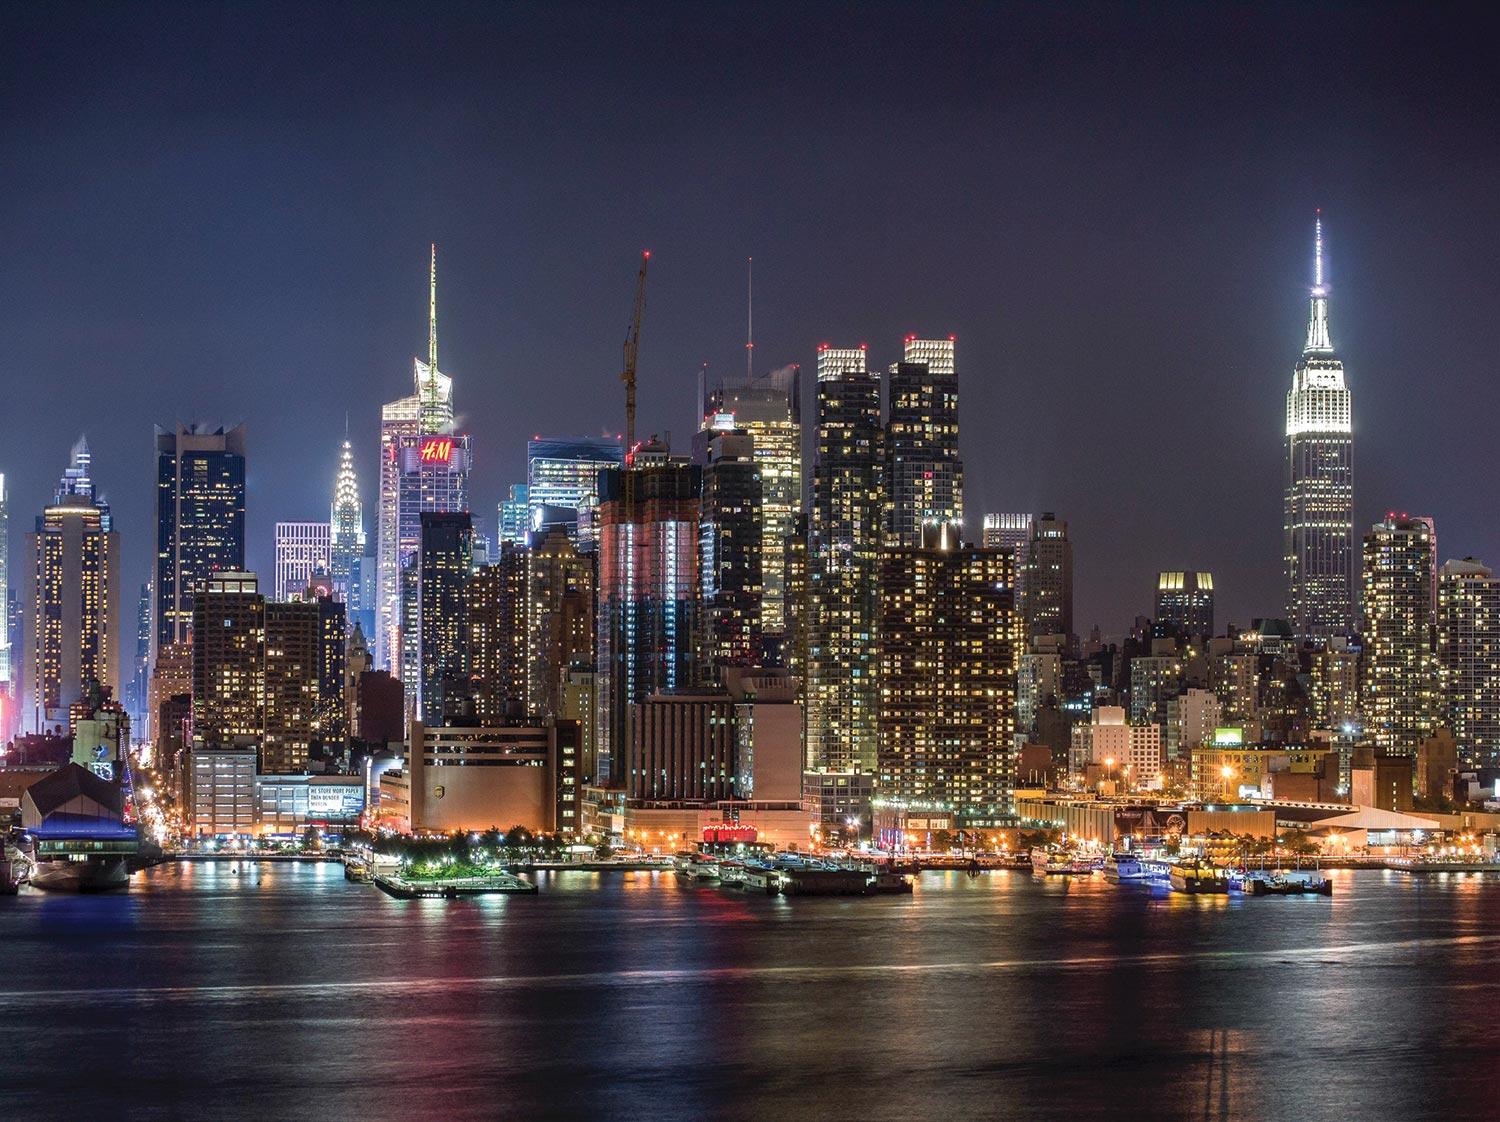 A landscape photograph of the New York City skyline at night